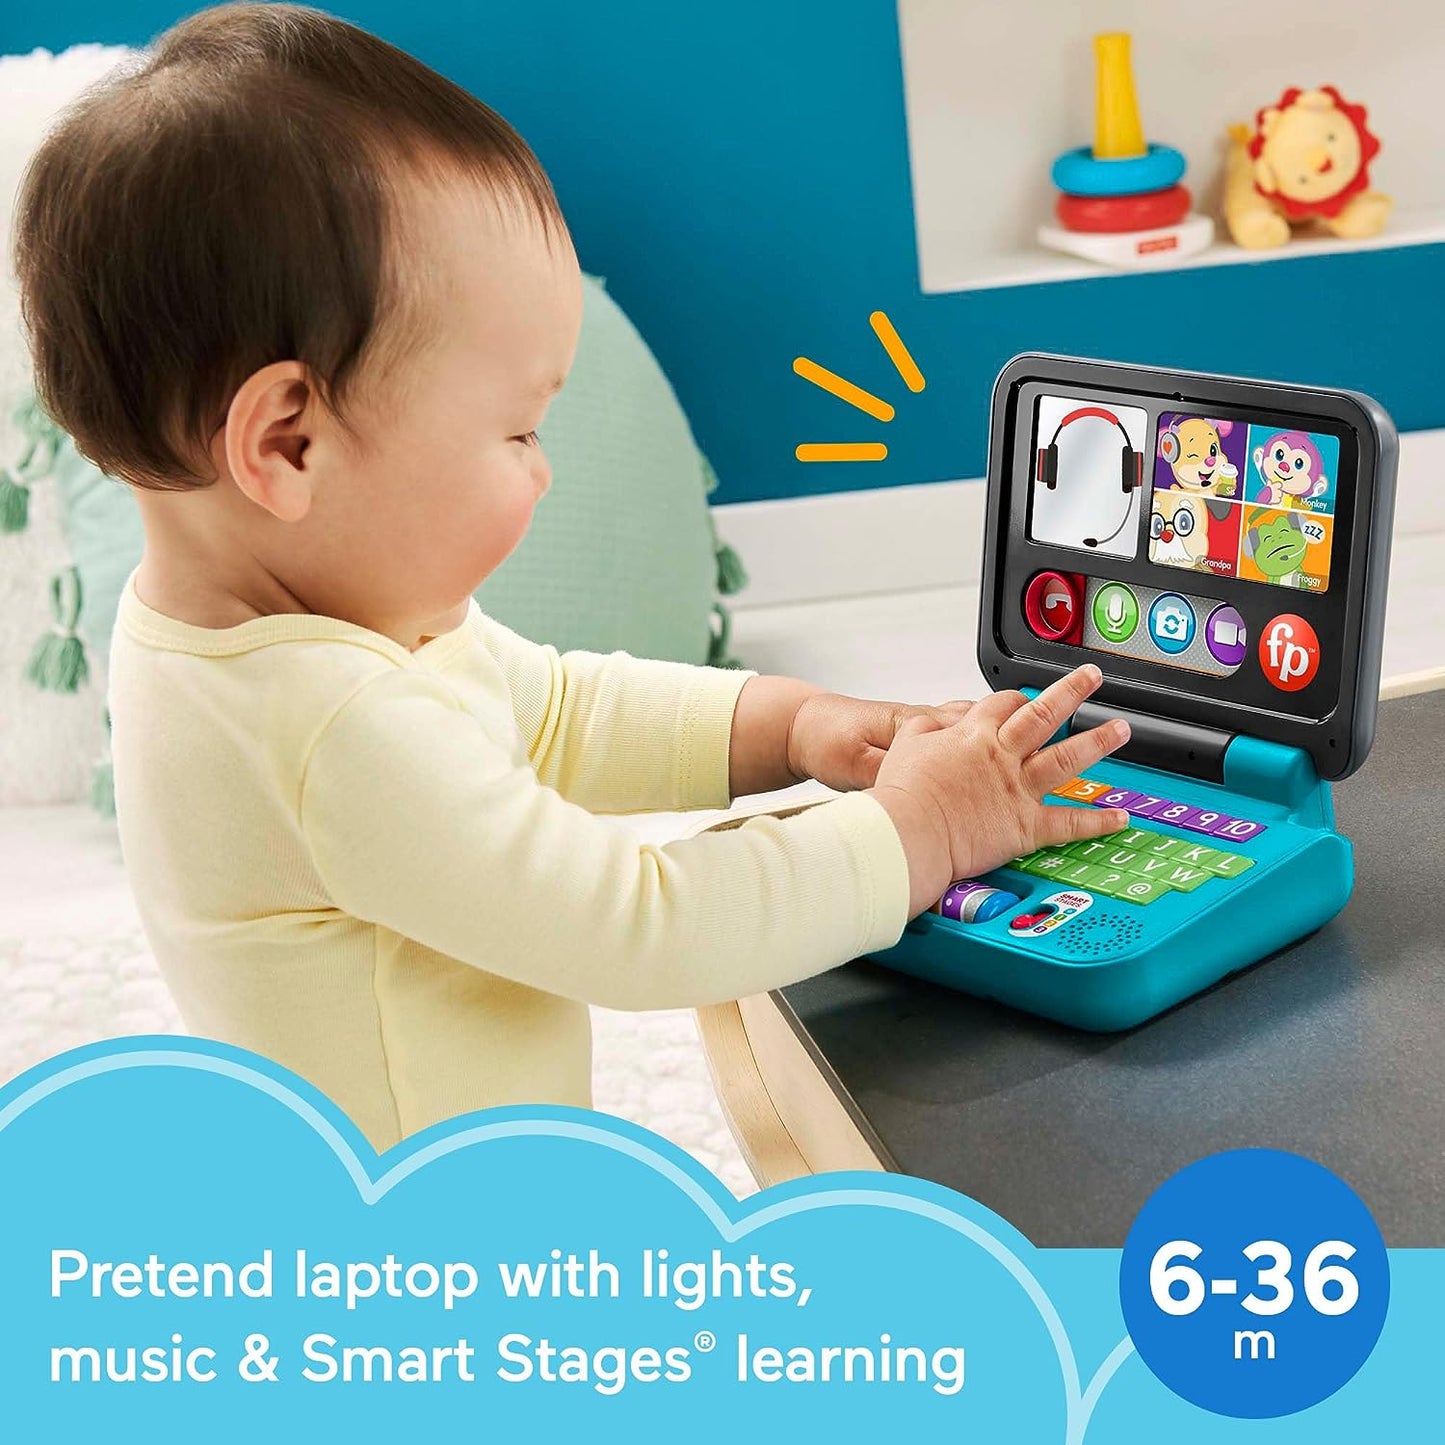 Fisher Price - Laugh & Learn Let's Connect Laptop HCF33